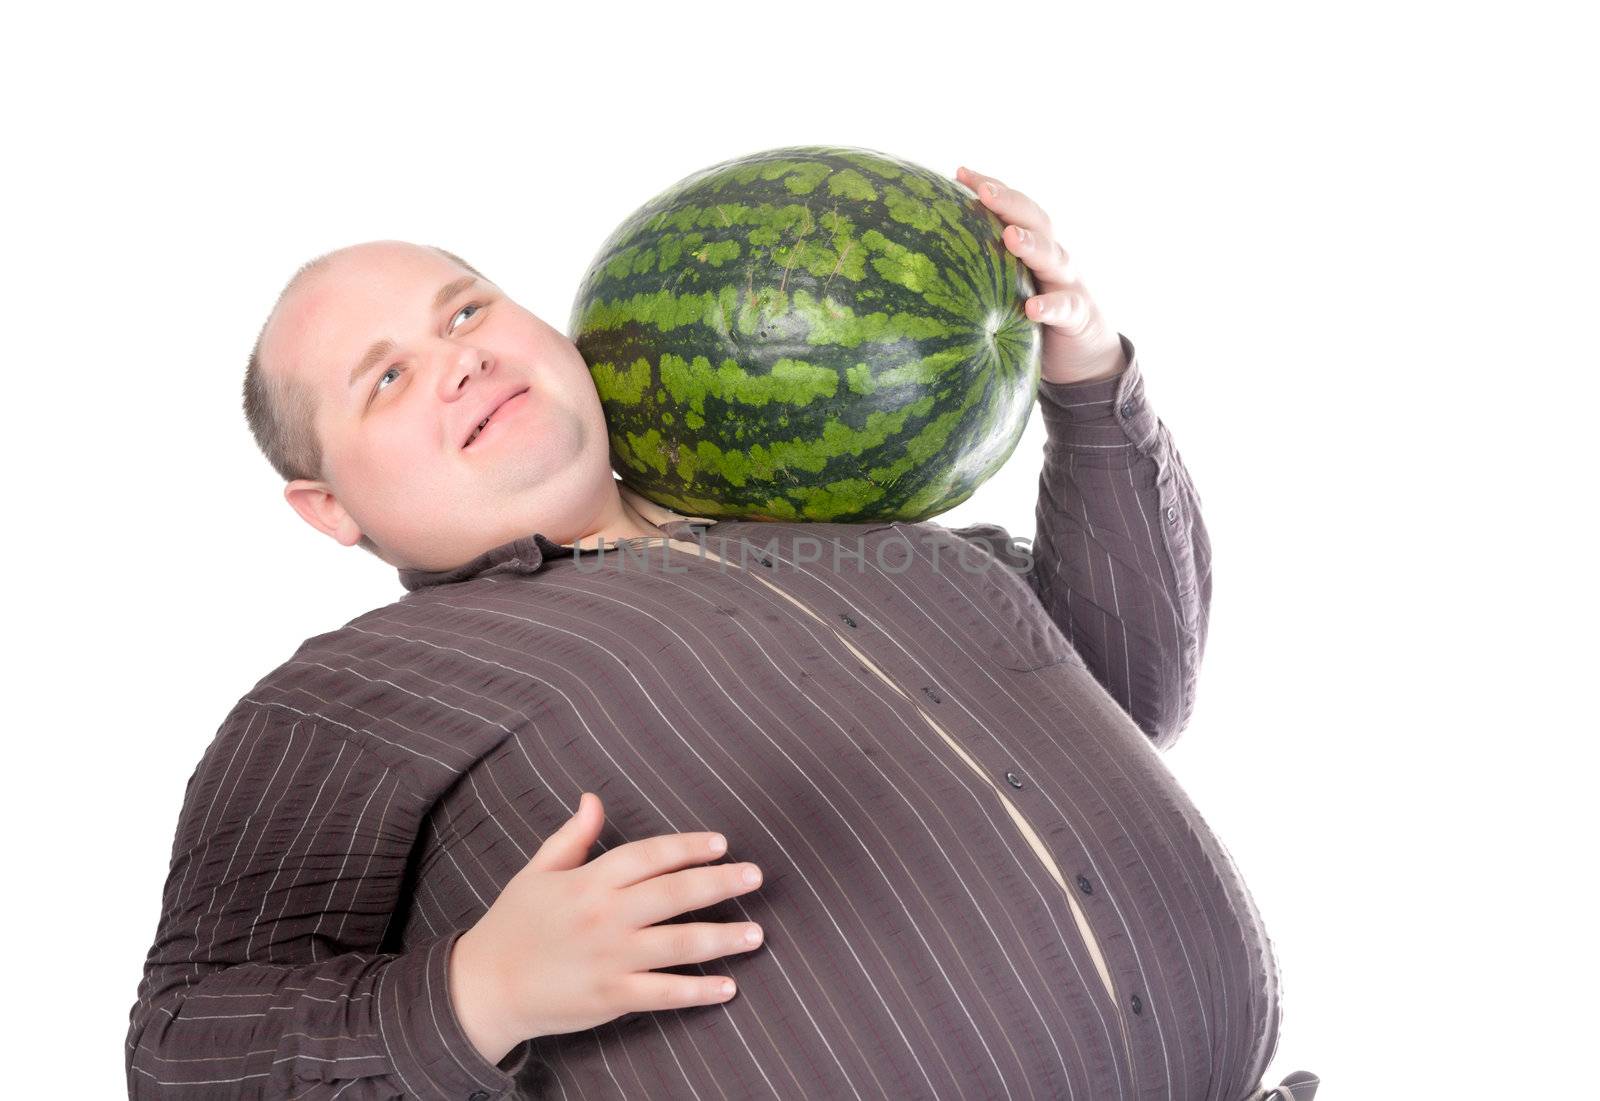 Obese man carrying a watermelon by Discovod